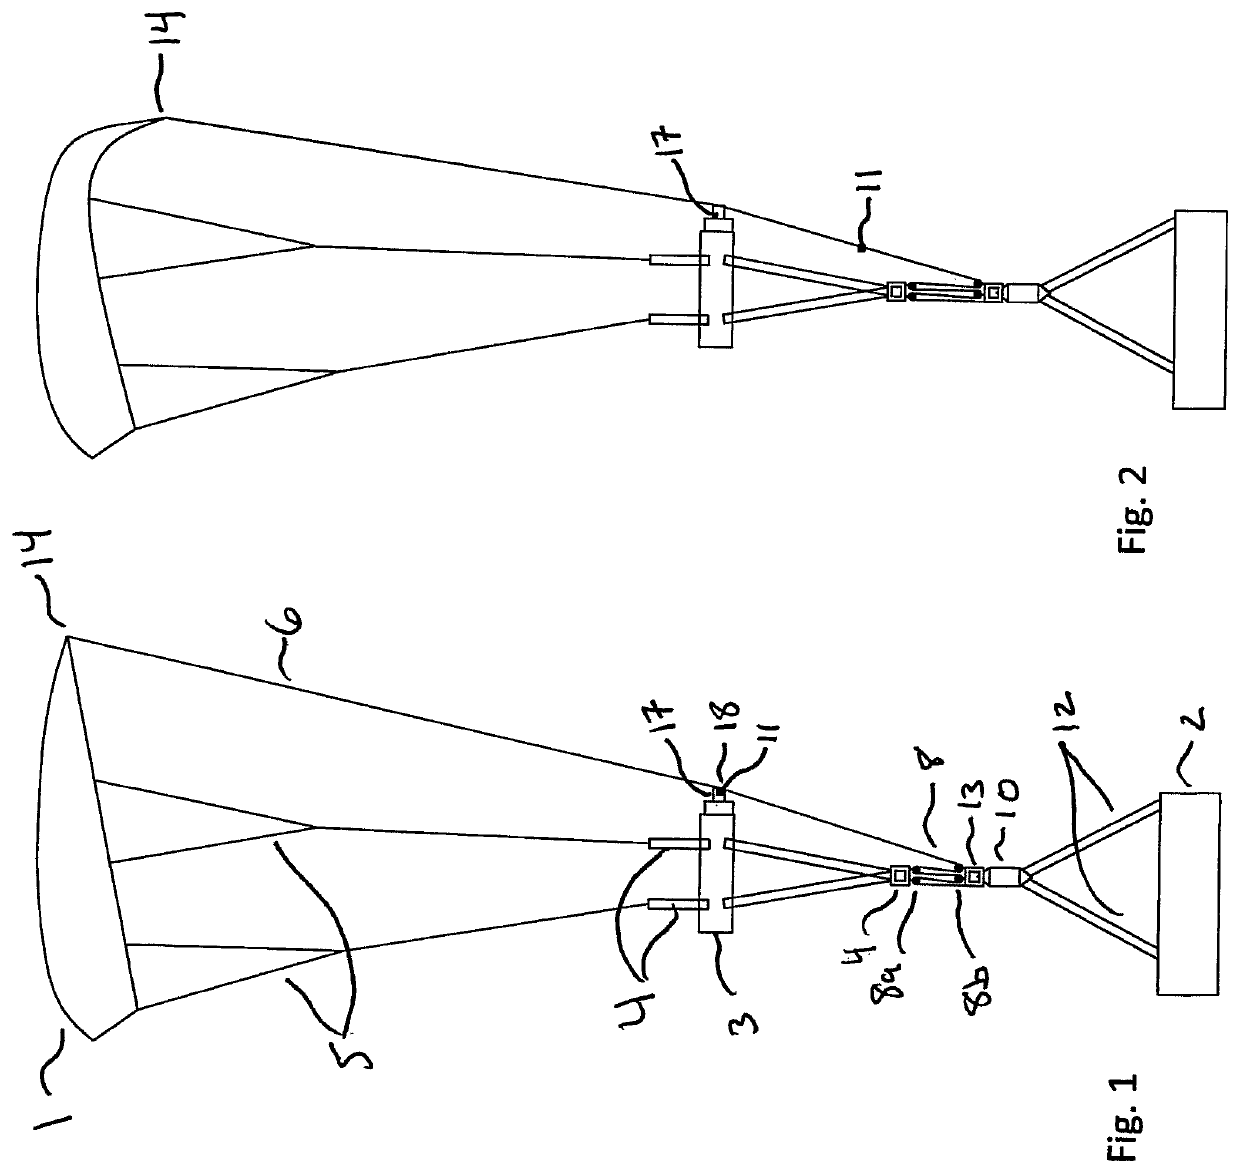 One-time flare mechanism